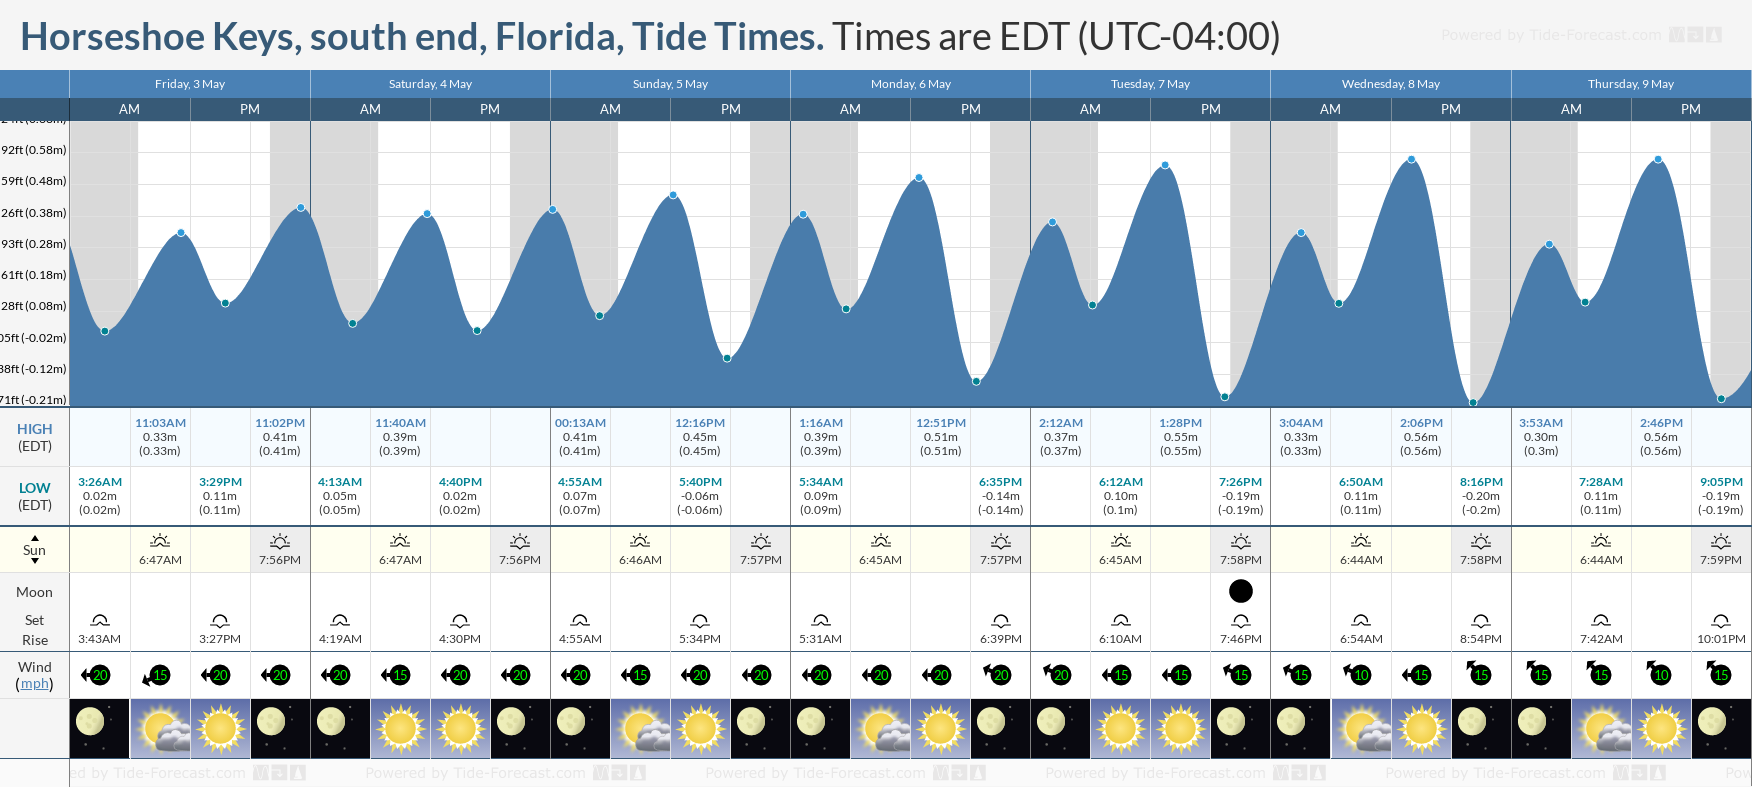 Horseshoe Keys, south end, Florida Tide Chart including high and low tide tide times for the next 7 days